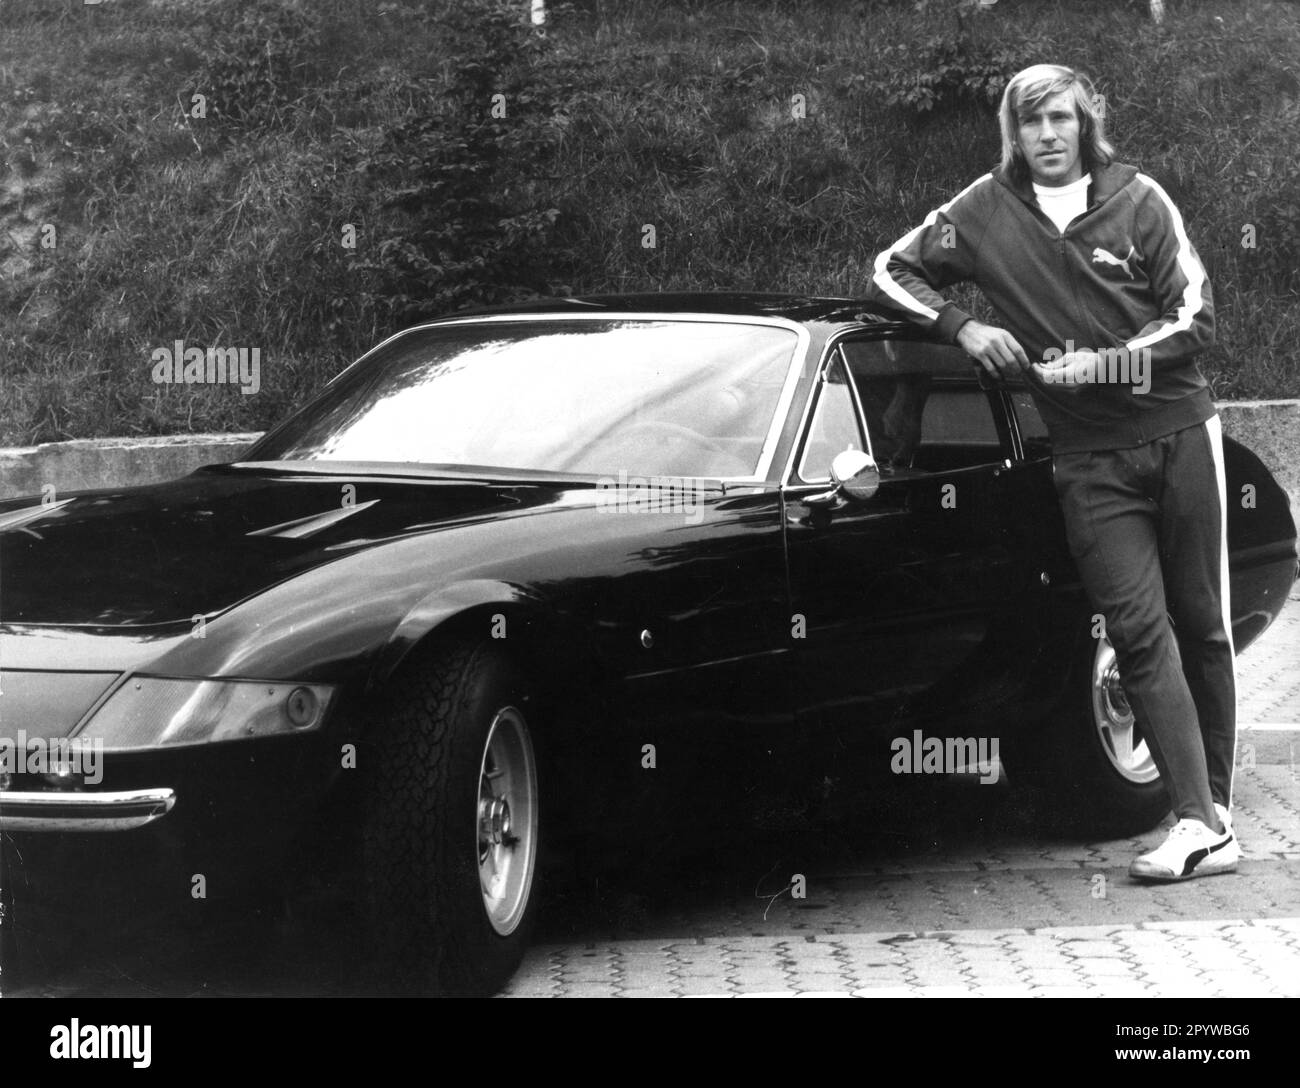 Günter Netzer (Real Madrid) with his Ferrari 365 GTB/4 Daytona Rec. 15.01.1974 (estimated). For journalistic use only! Only for editorial use! [automated translation] Stock Photo